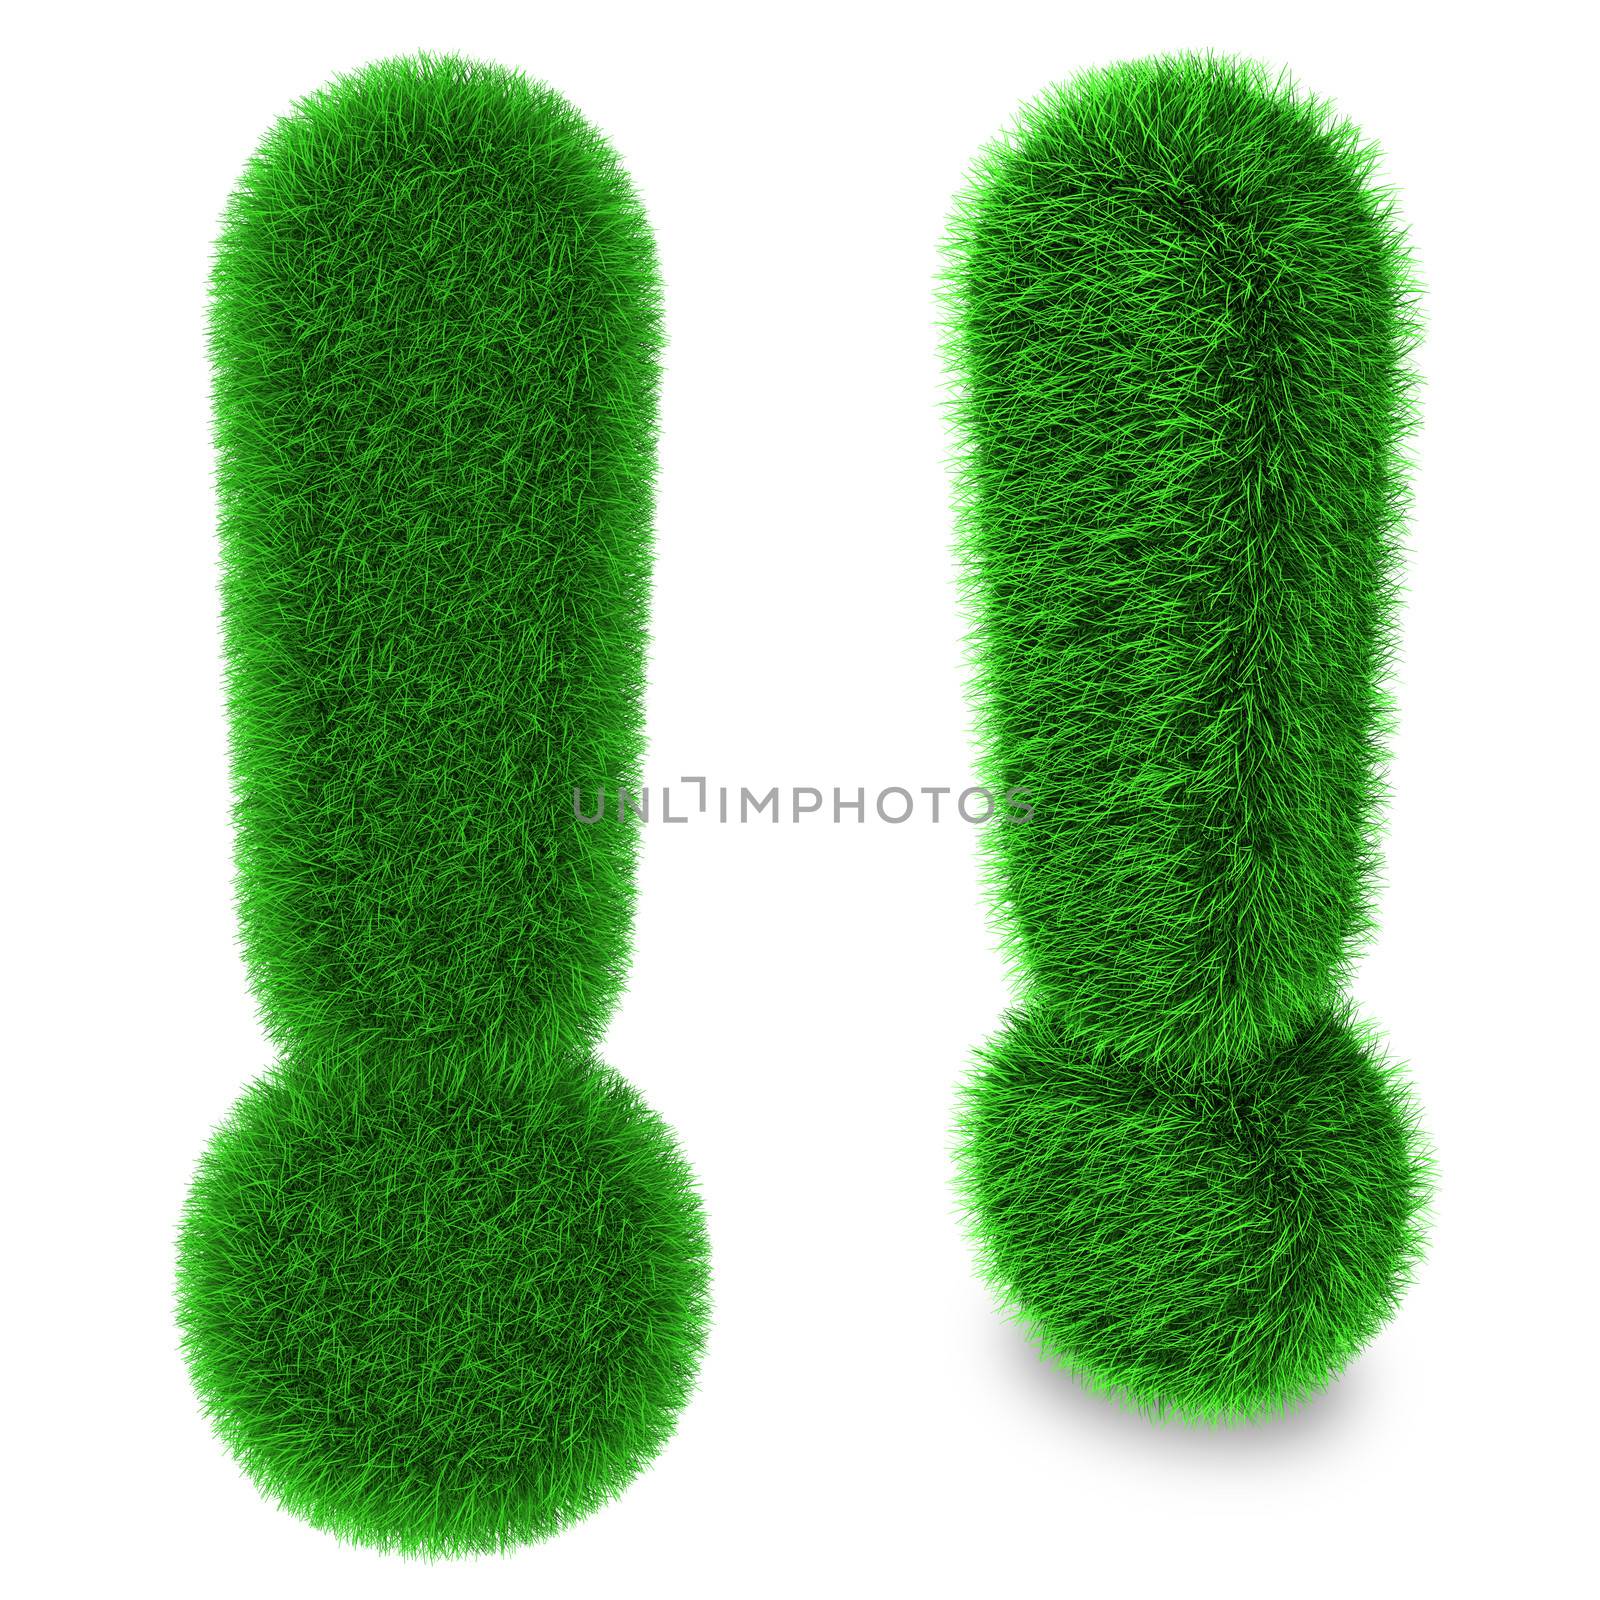 Exclamation mark covered by green grass isolated on white background